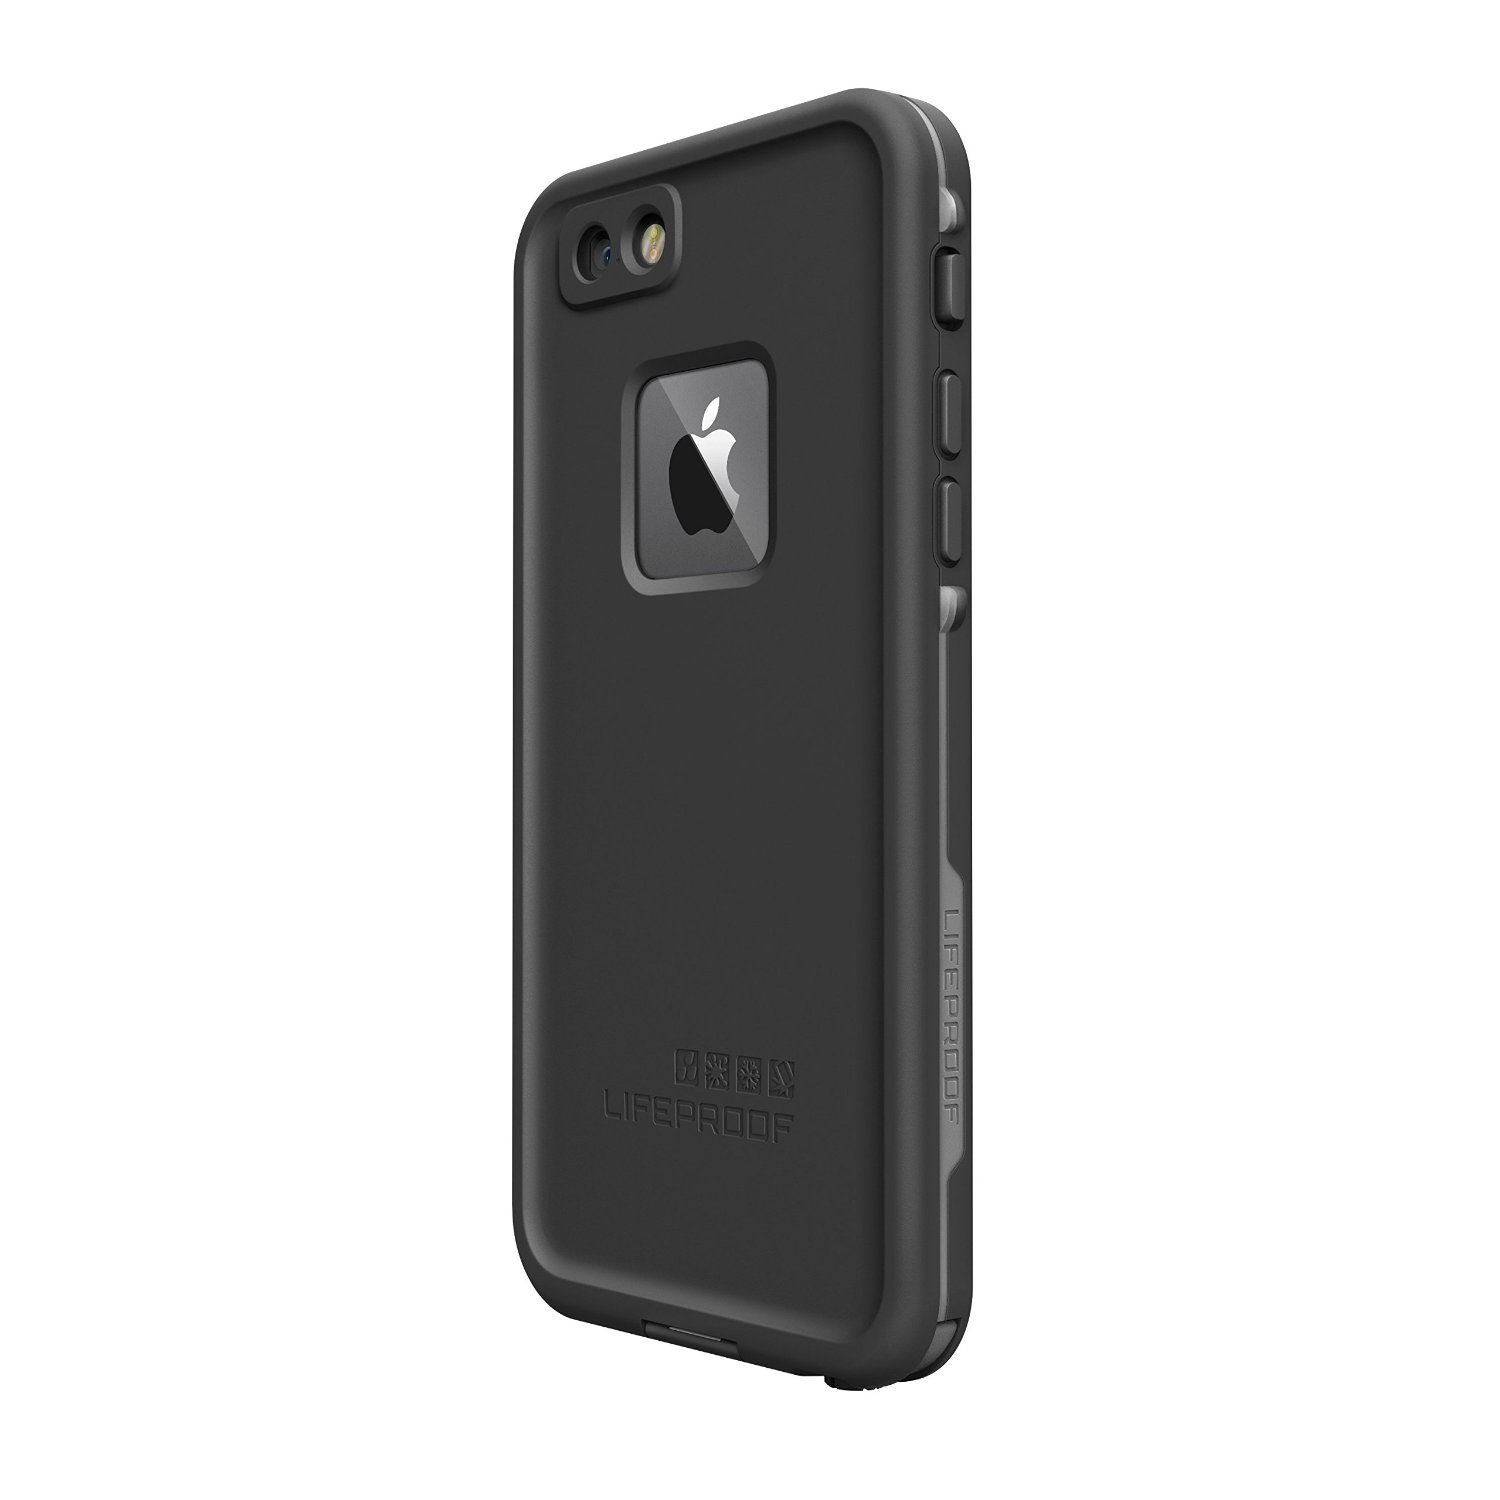 Best waterproof cases for iPhone 6: Lifeproof Fre